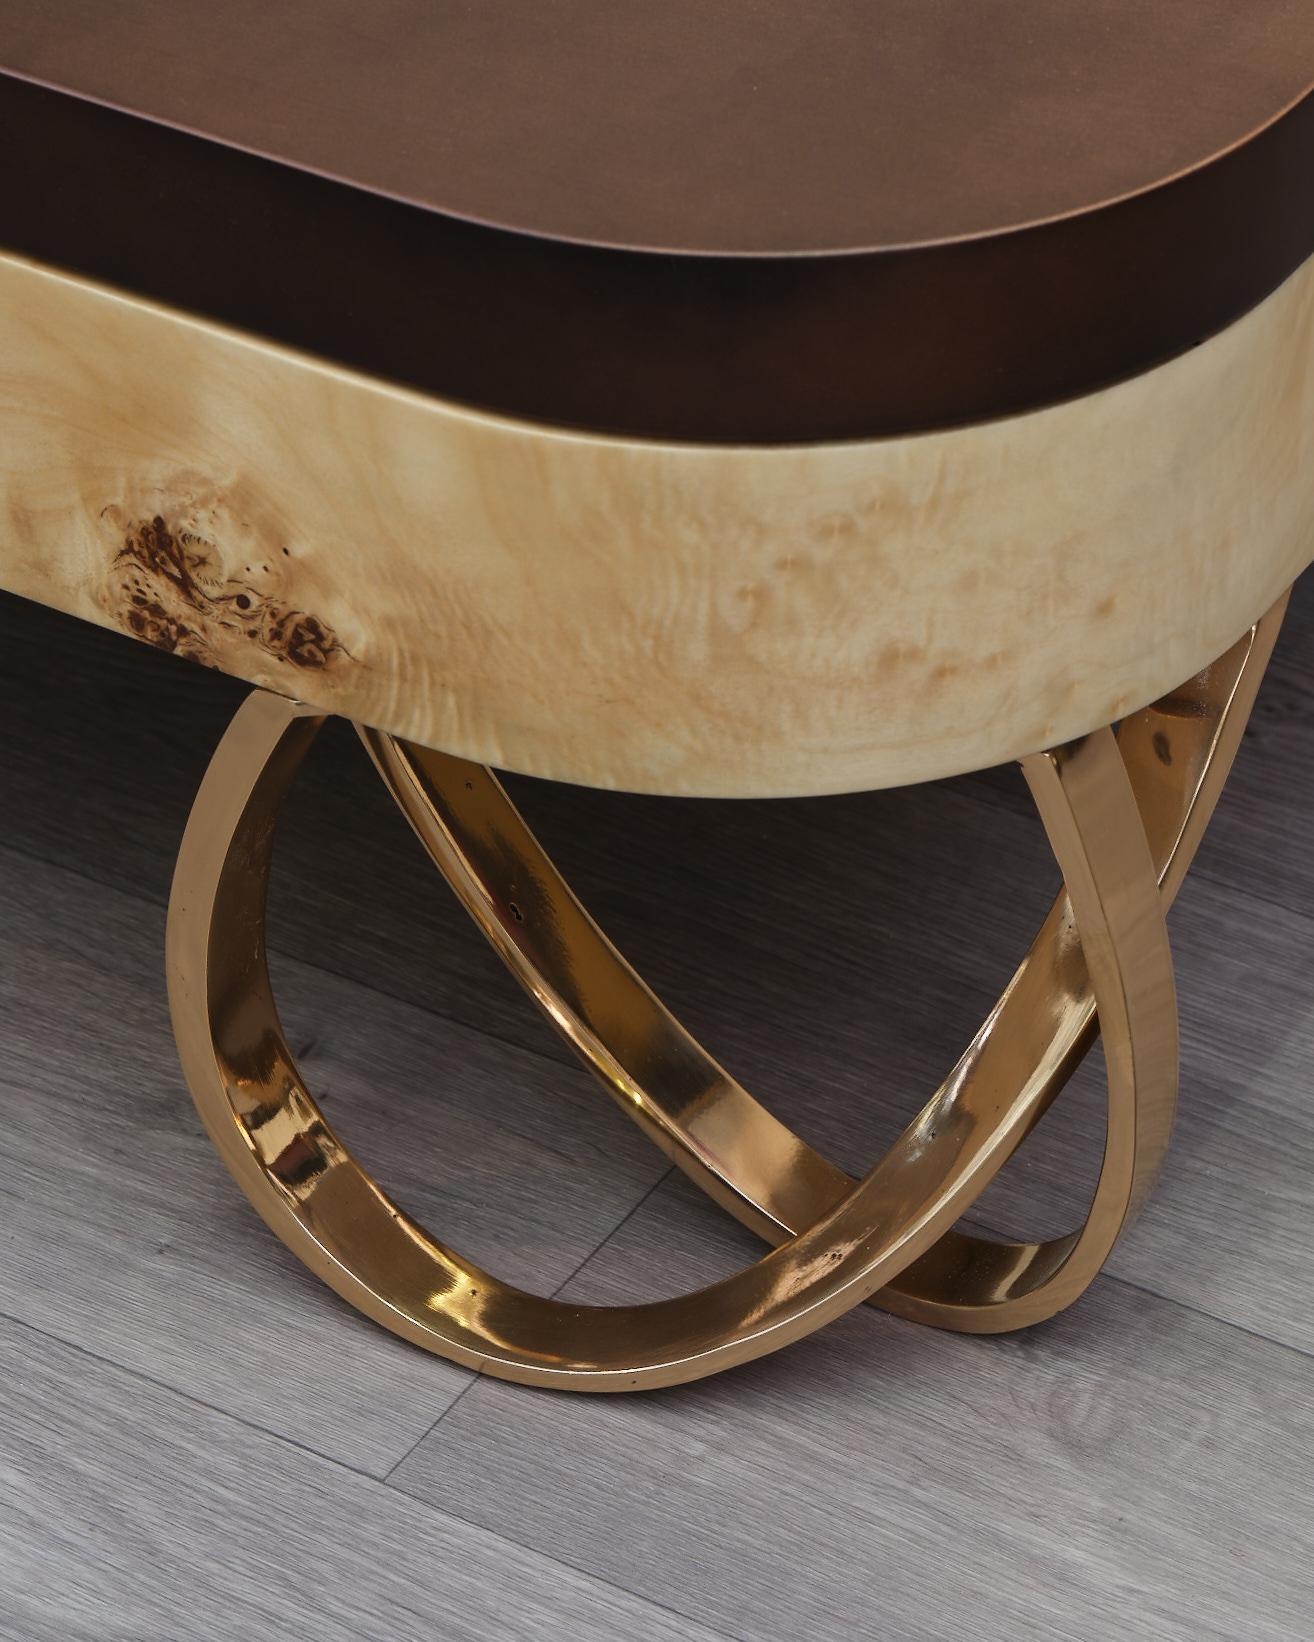 Modern Contemporary Coffee Table, Handcrafted in Bronze and Wood by Belbar Studio For Sale